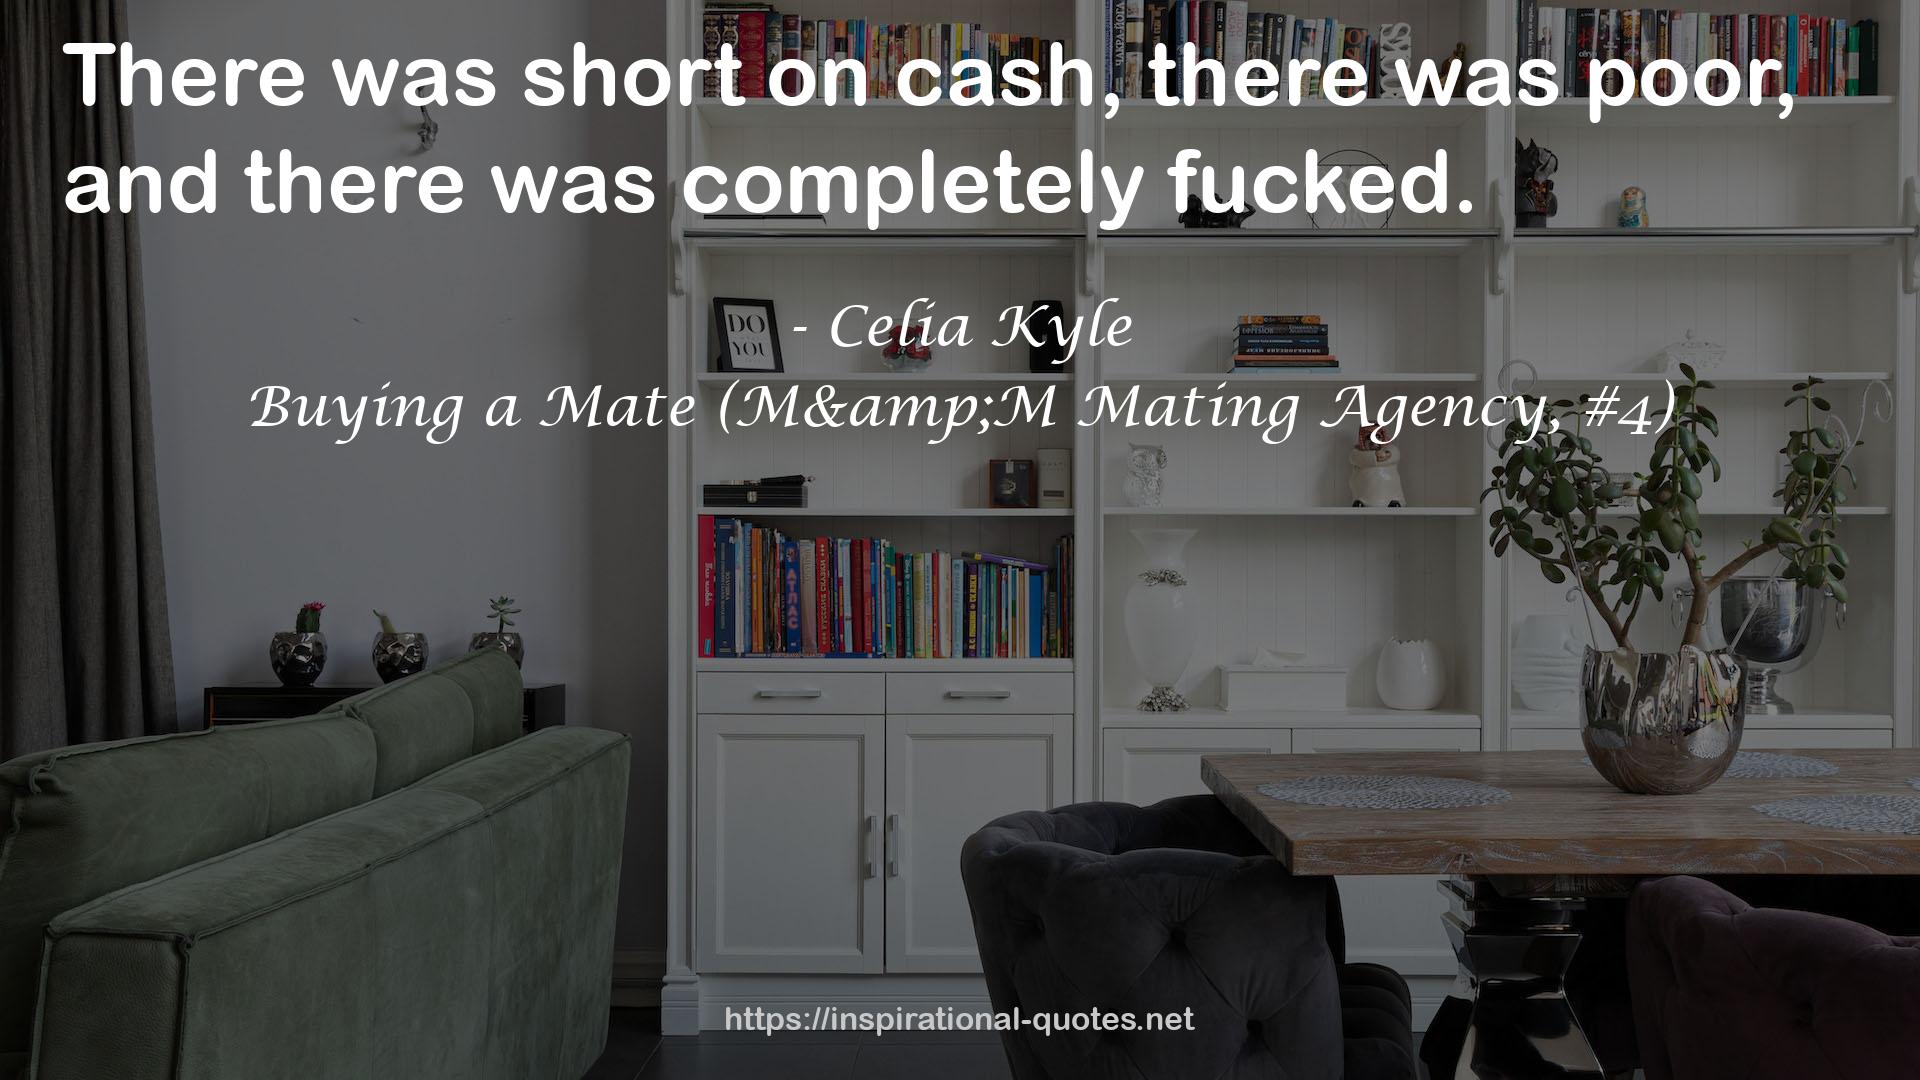 Buying a Mate (M&M Mating Agency, #4) QUOTES